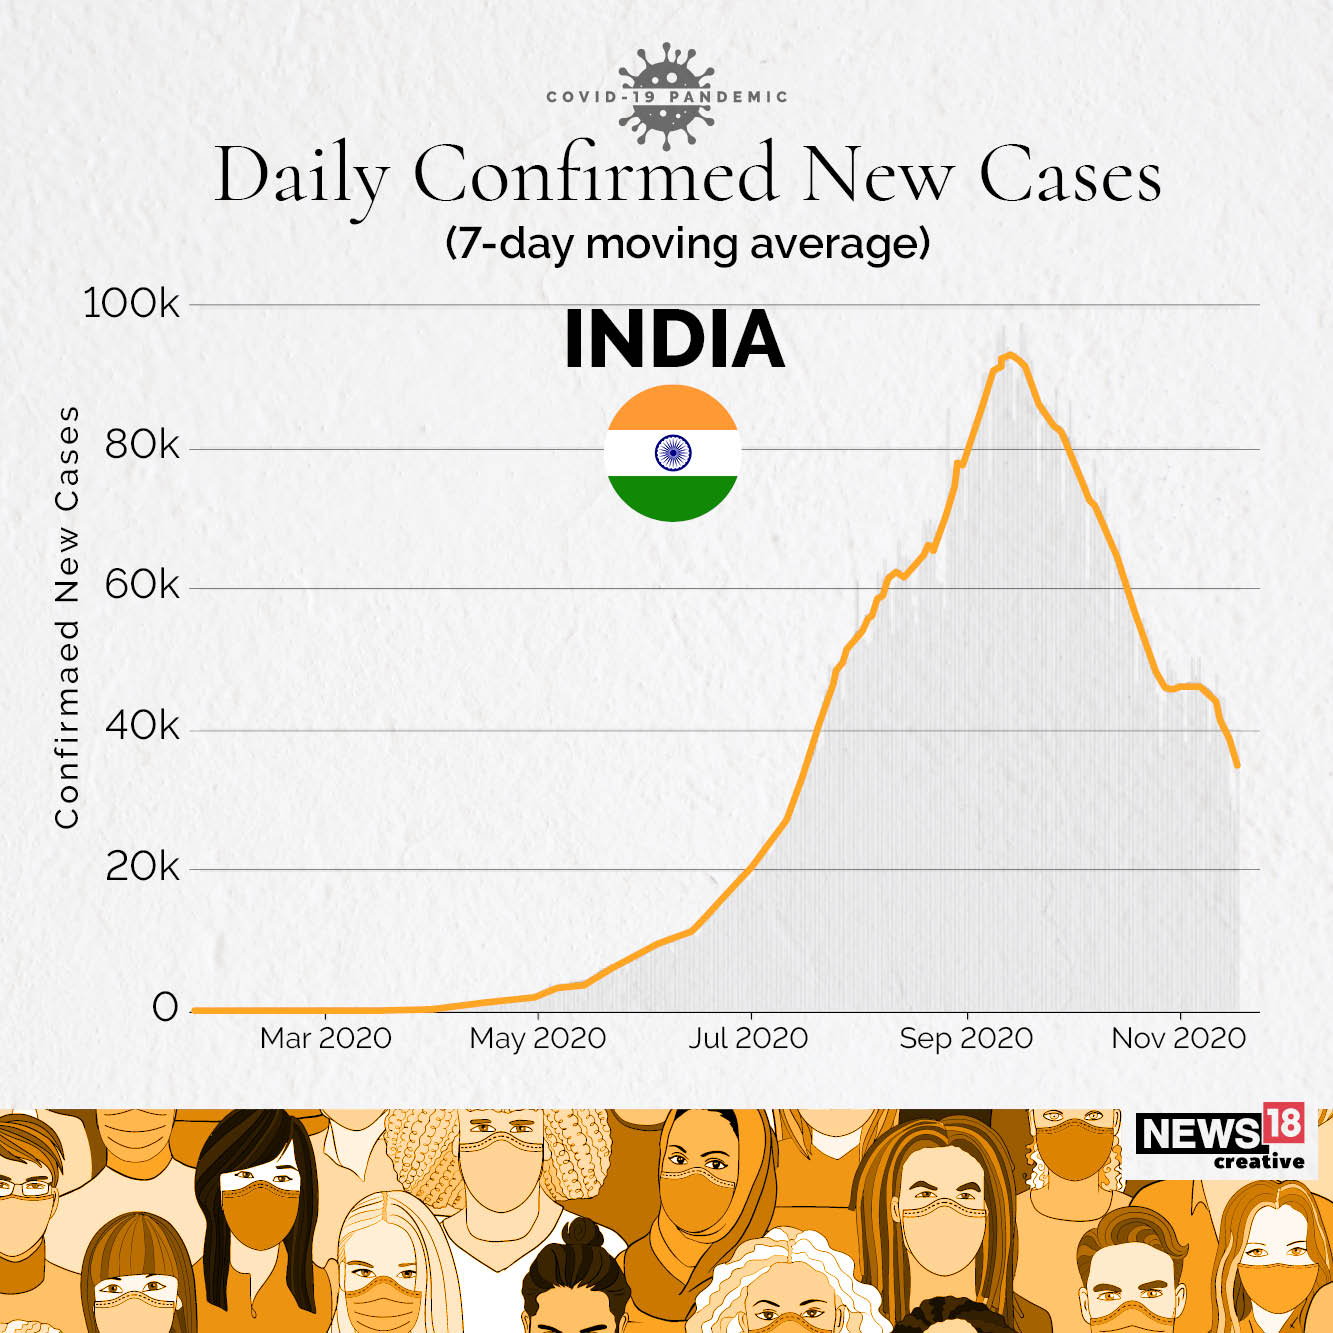 India sees a decline in Covid-19 cases